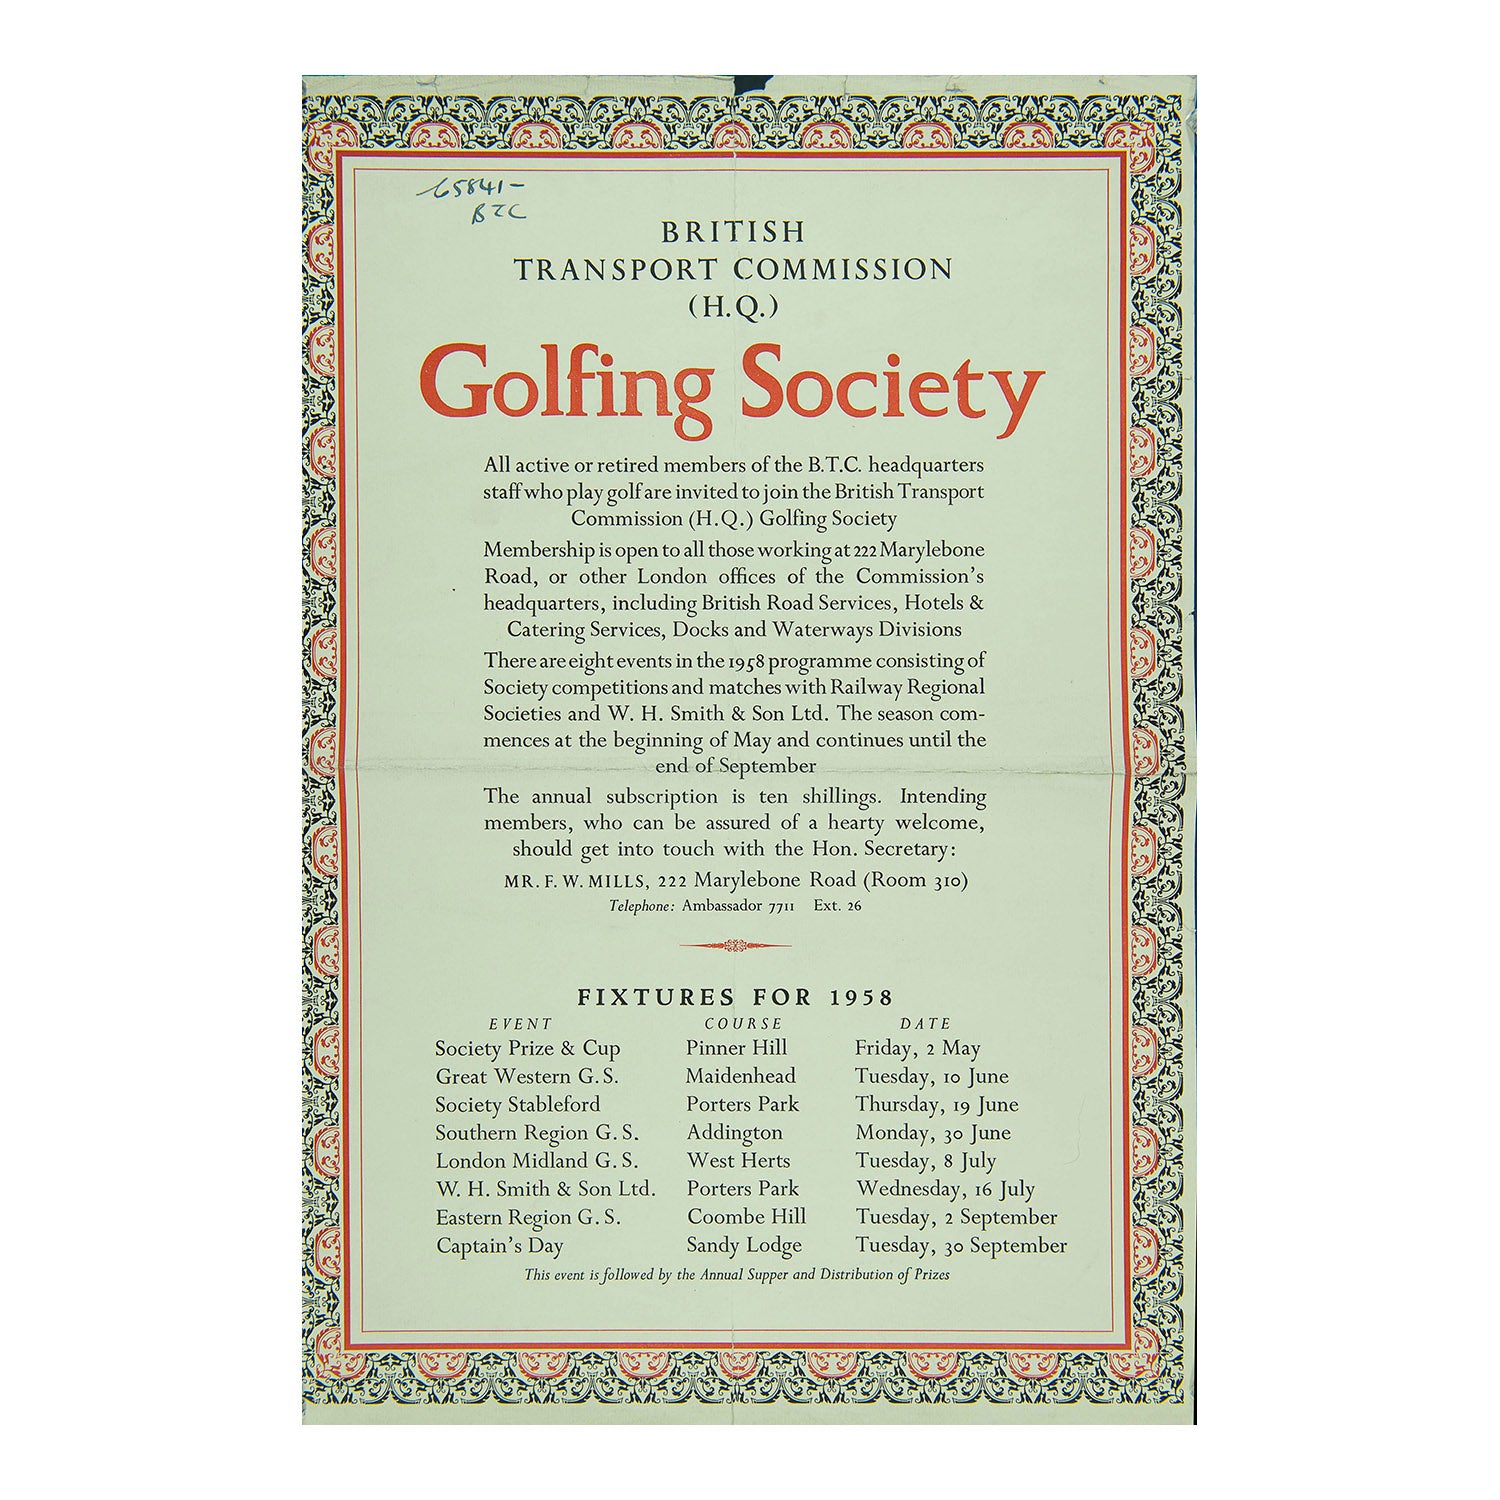 poster promoting the British Transport Commission (HQ) Golfing Society, 1958